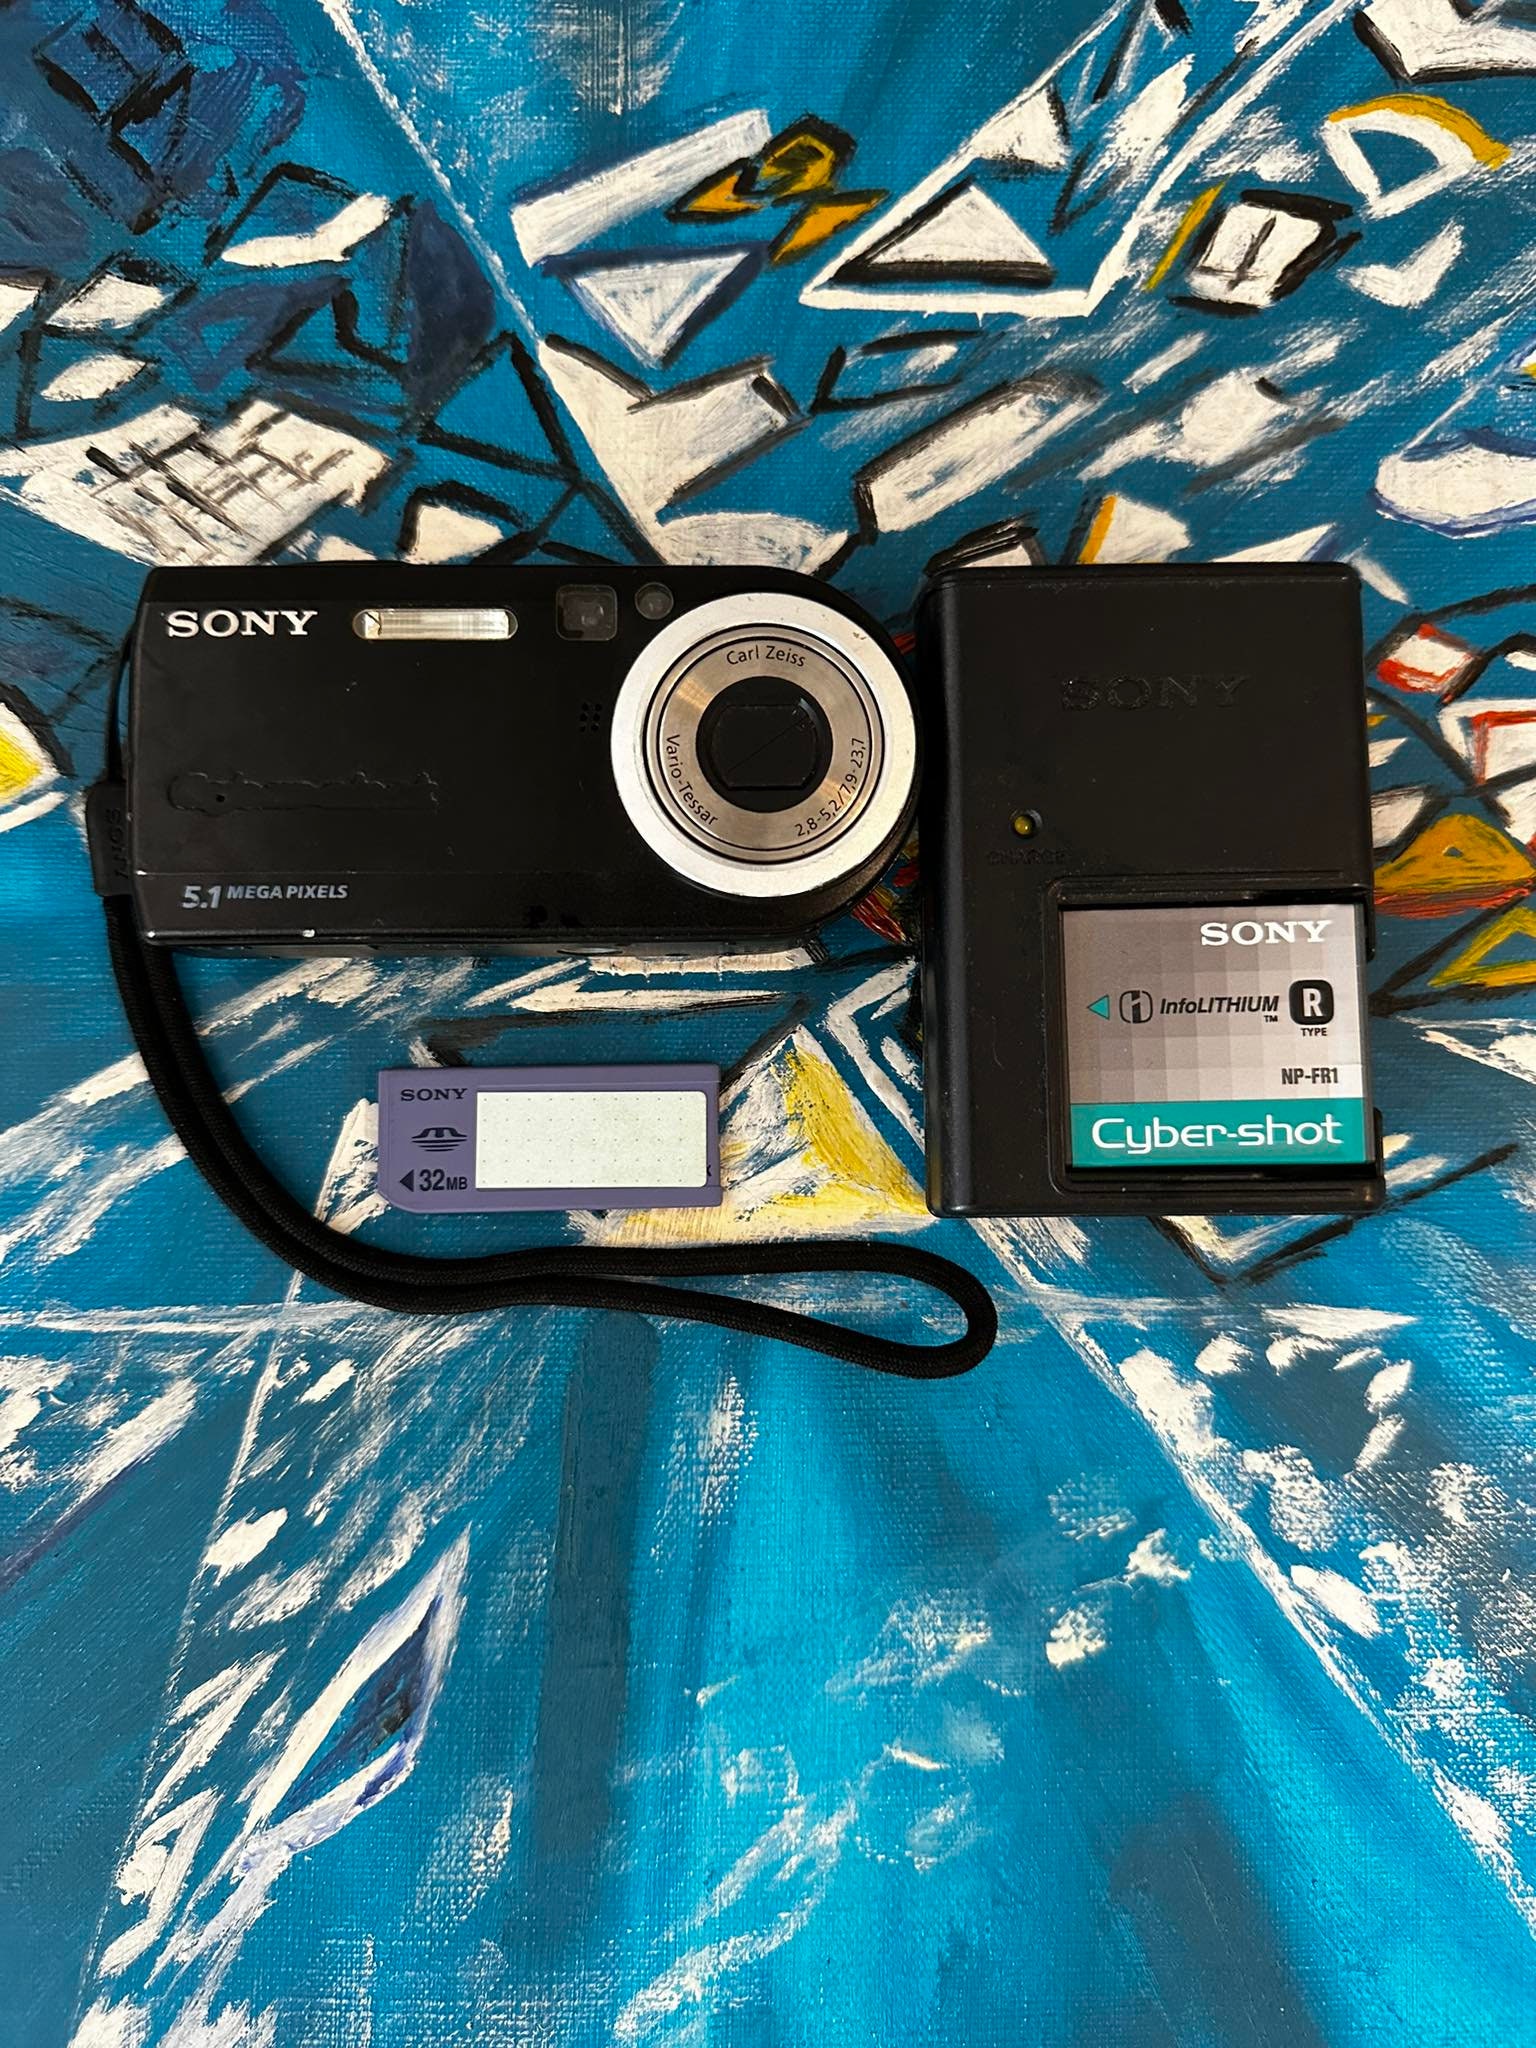 Sony Cyber-shot DSC-P120 Compact Digital Camera 7.2MP 3x Optical Zoom  Screen 2 Inches LCD Charger and 32 MB Memory Card -  Finland